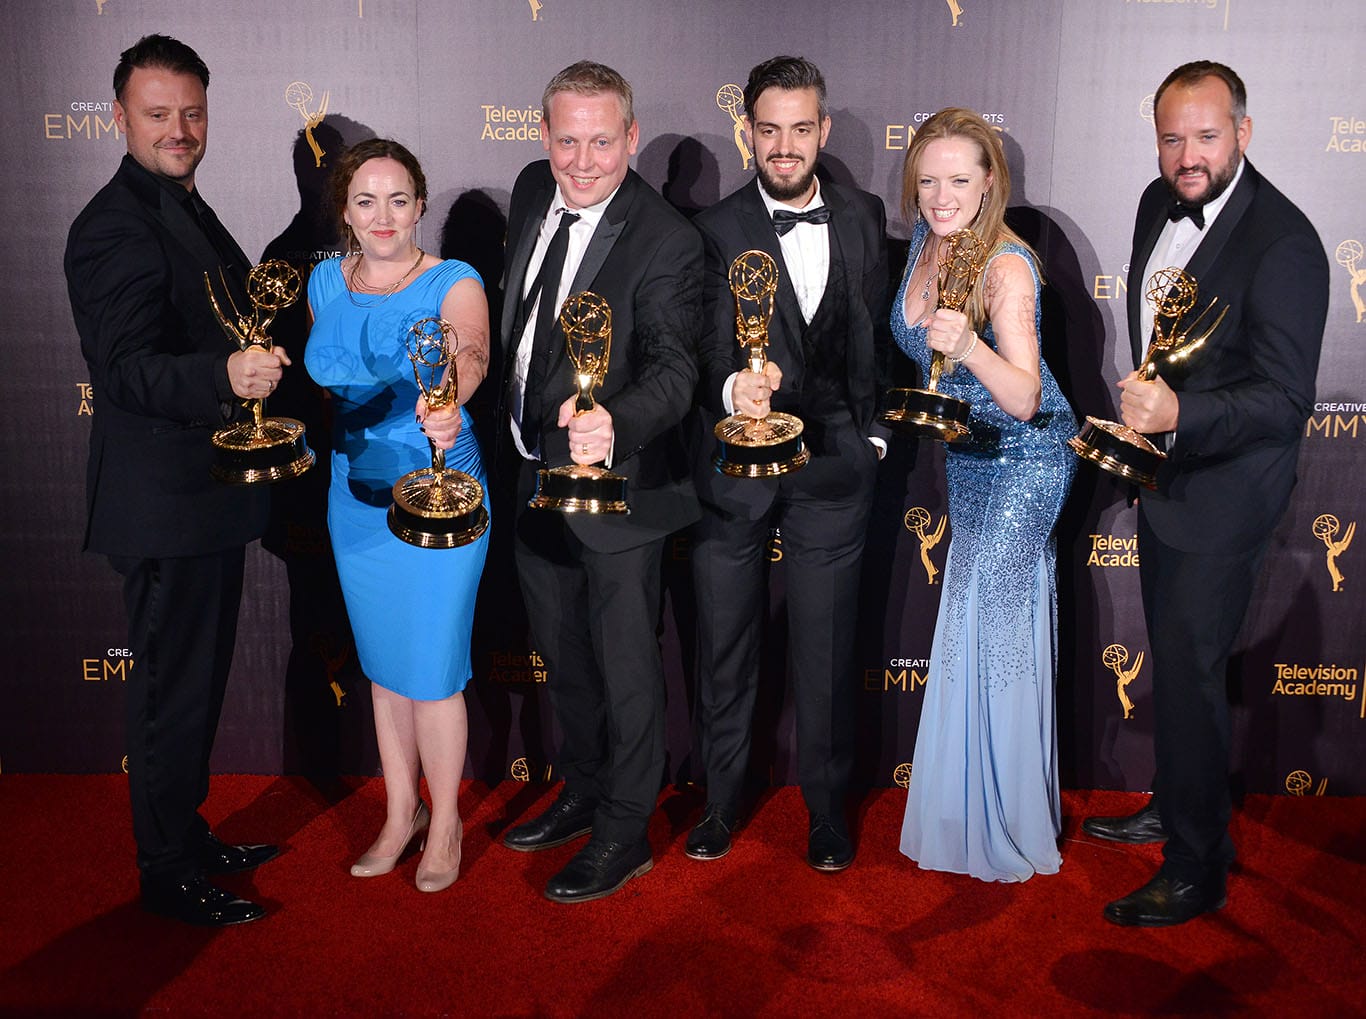 The team of Sherlock poses in the press room with their awards for outstanding special visual effects in a supporting role for "Sherlock: The Abominable Bride" (Masterpiece) at the 2016 Creative Arts Emmy Awards - Day 1 held at the Microsoft Theater in Los Angeles, CA on Saturday, September 10, 2016. (Photo By Sthanlee B. Mirador) *** Please Use Credit from Credit Field ***